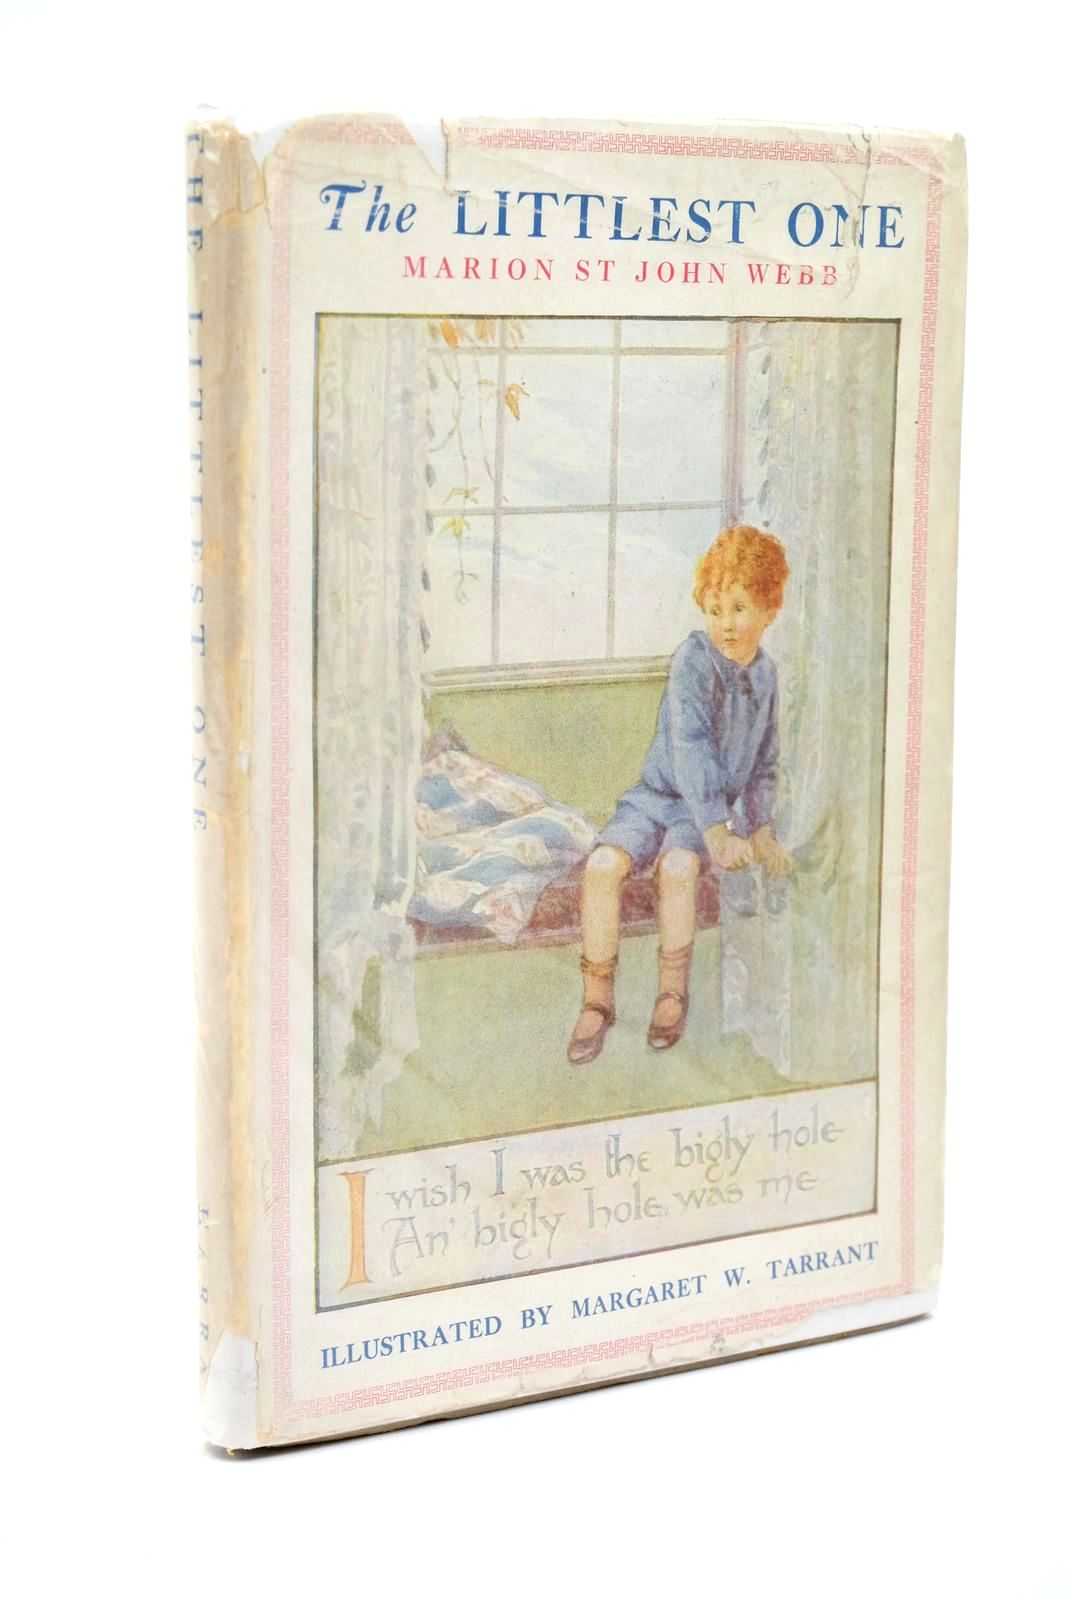 Photo of THE LITTLEST ONE written by Webb, Marion St. John illustrated by Tarrant, Margaret published by George G. Harrap & Co. Ltd. (STOCK CODE: 1323089)  for sale by Stella & Rose's Books